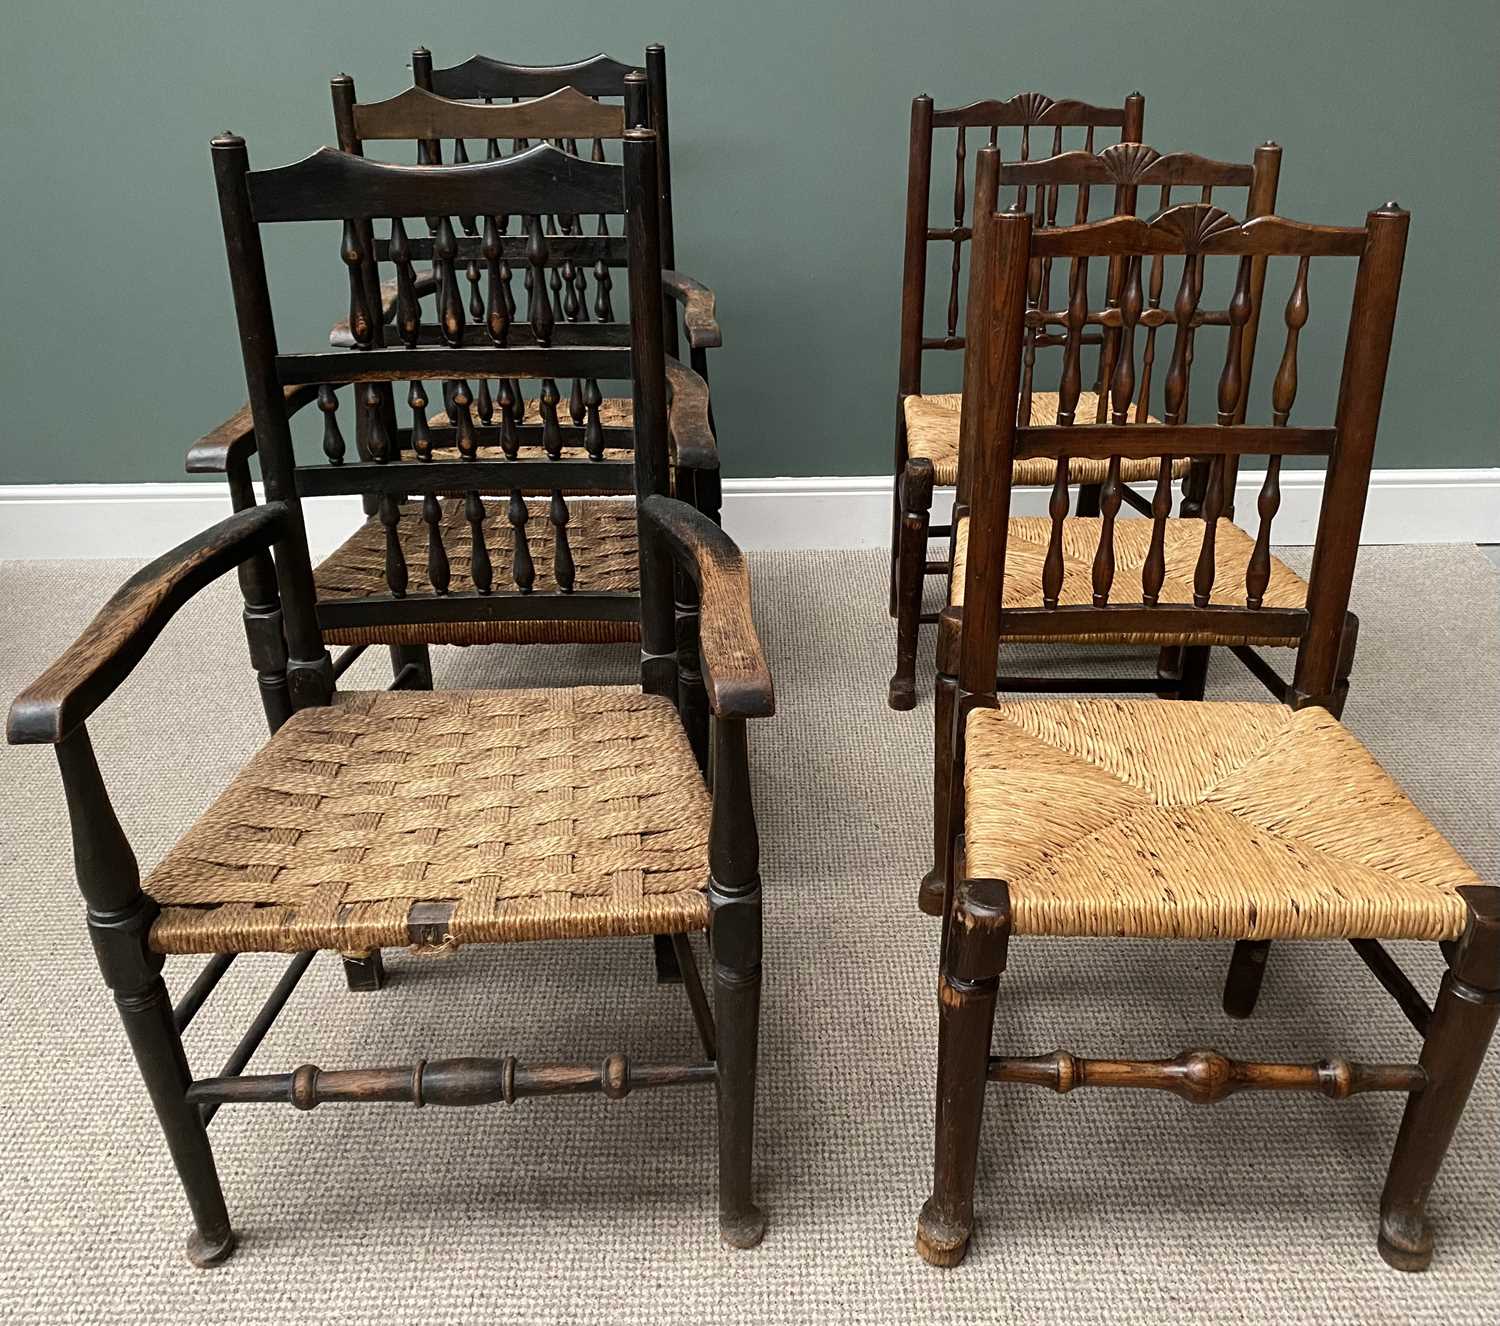 SIX ANTIQUE OAK SPINDLE BACK FARMHOUSE CHAIRS (3+3) the first three having double spindle backs with